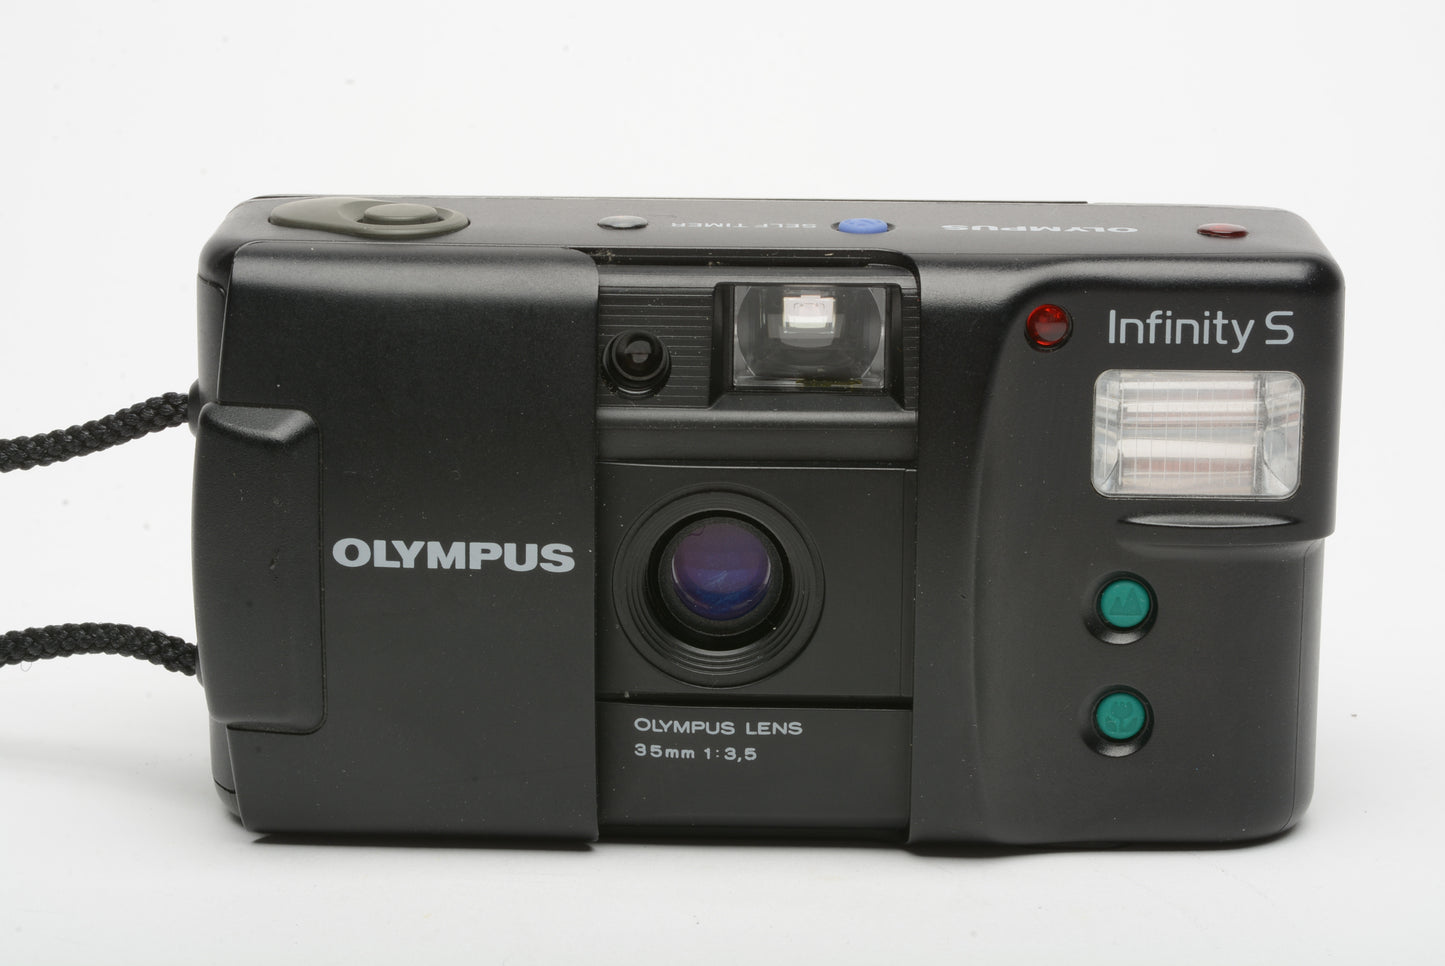 Olympus Infinity S 35mm Point&Shoot camera, strap, tested, Nice!